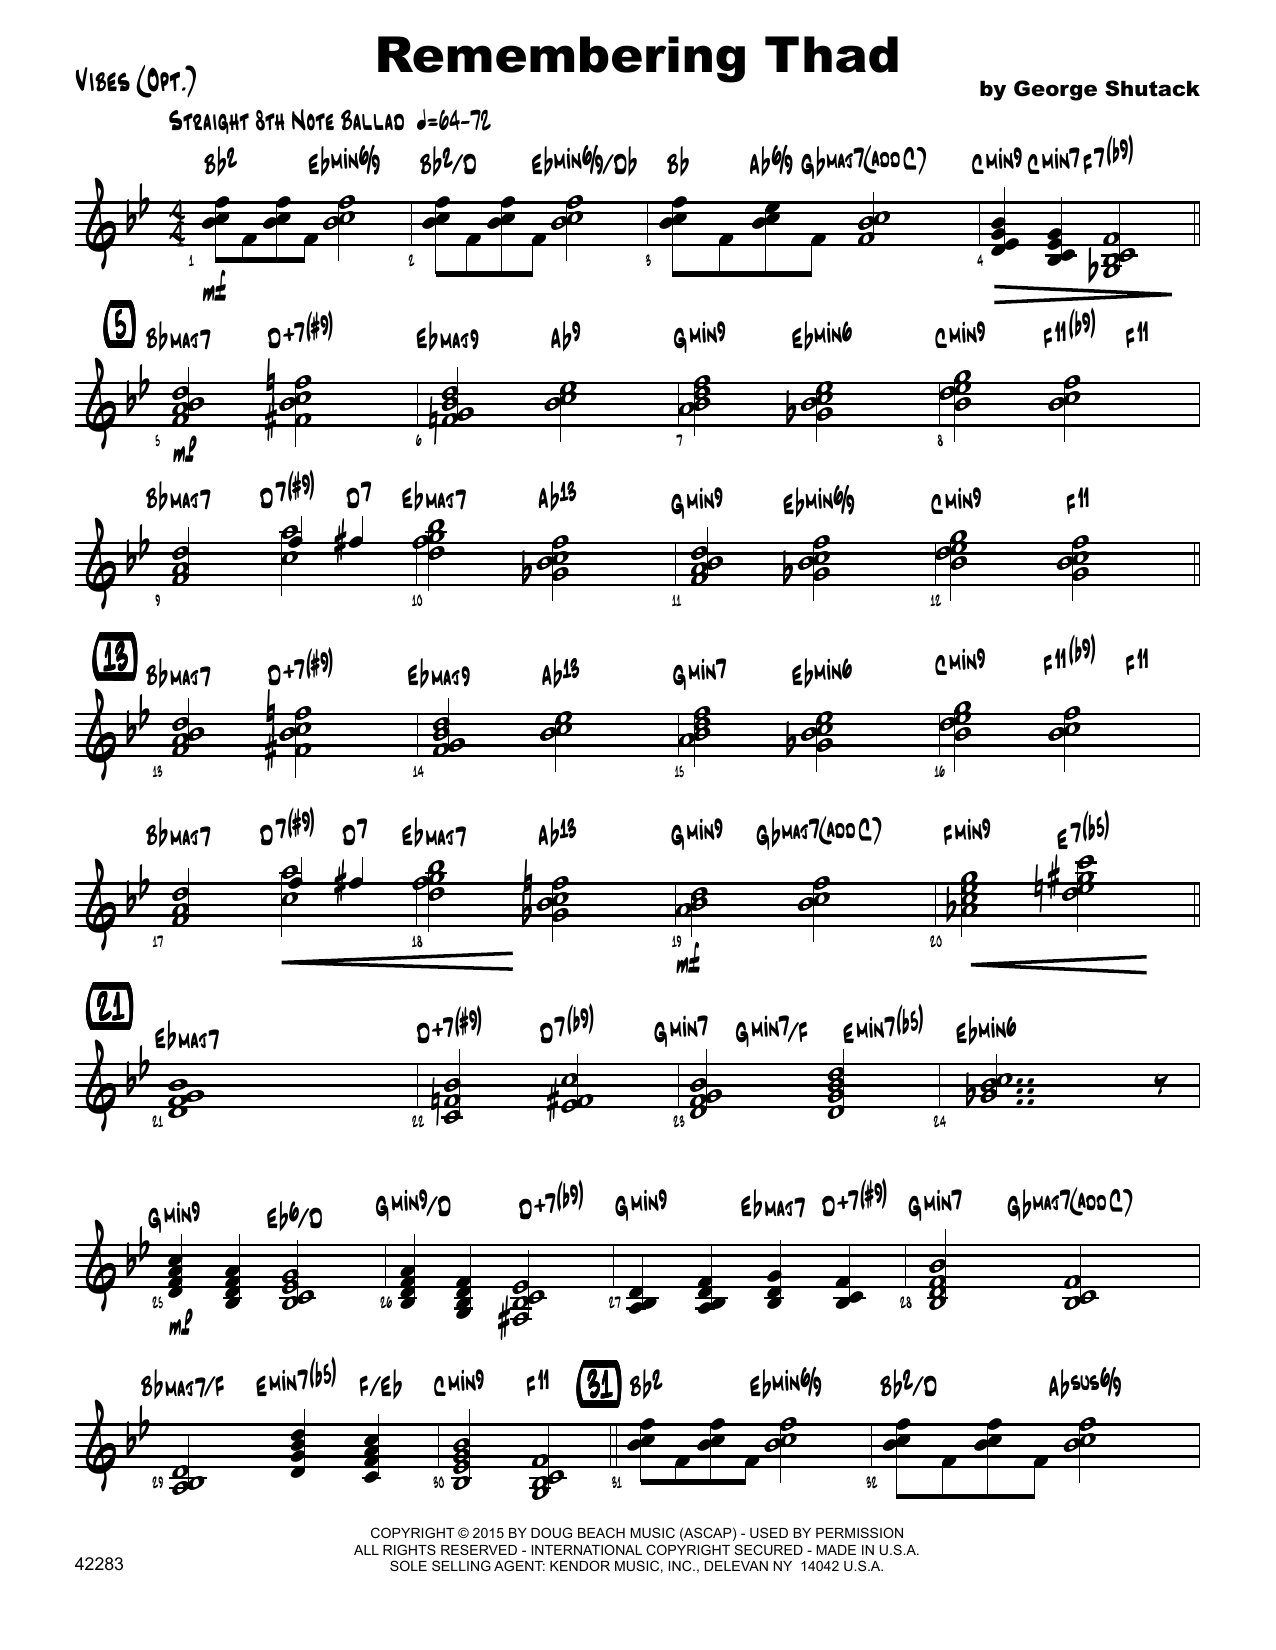 Download George Shutack Remembering Thad - Vibes Sheet Music